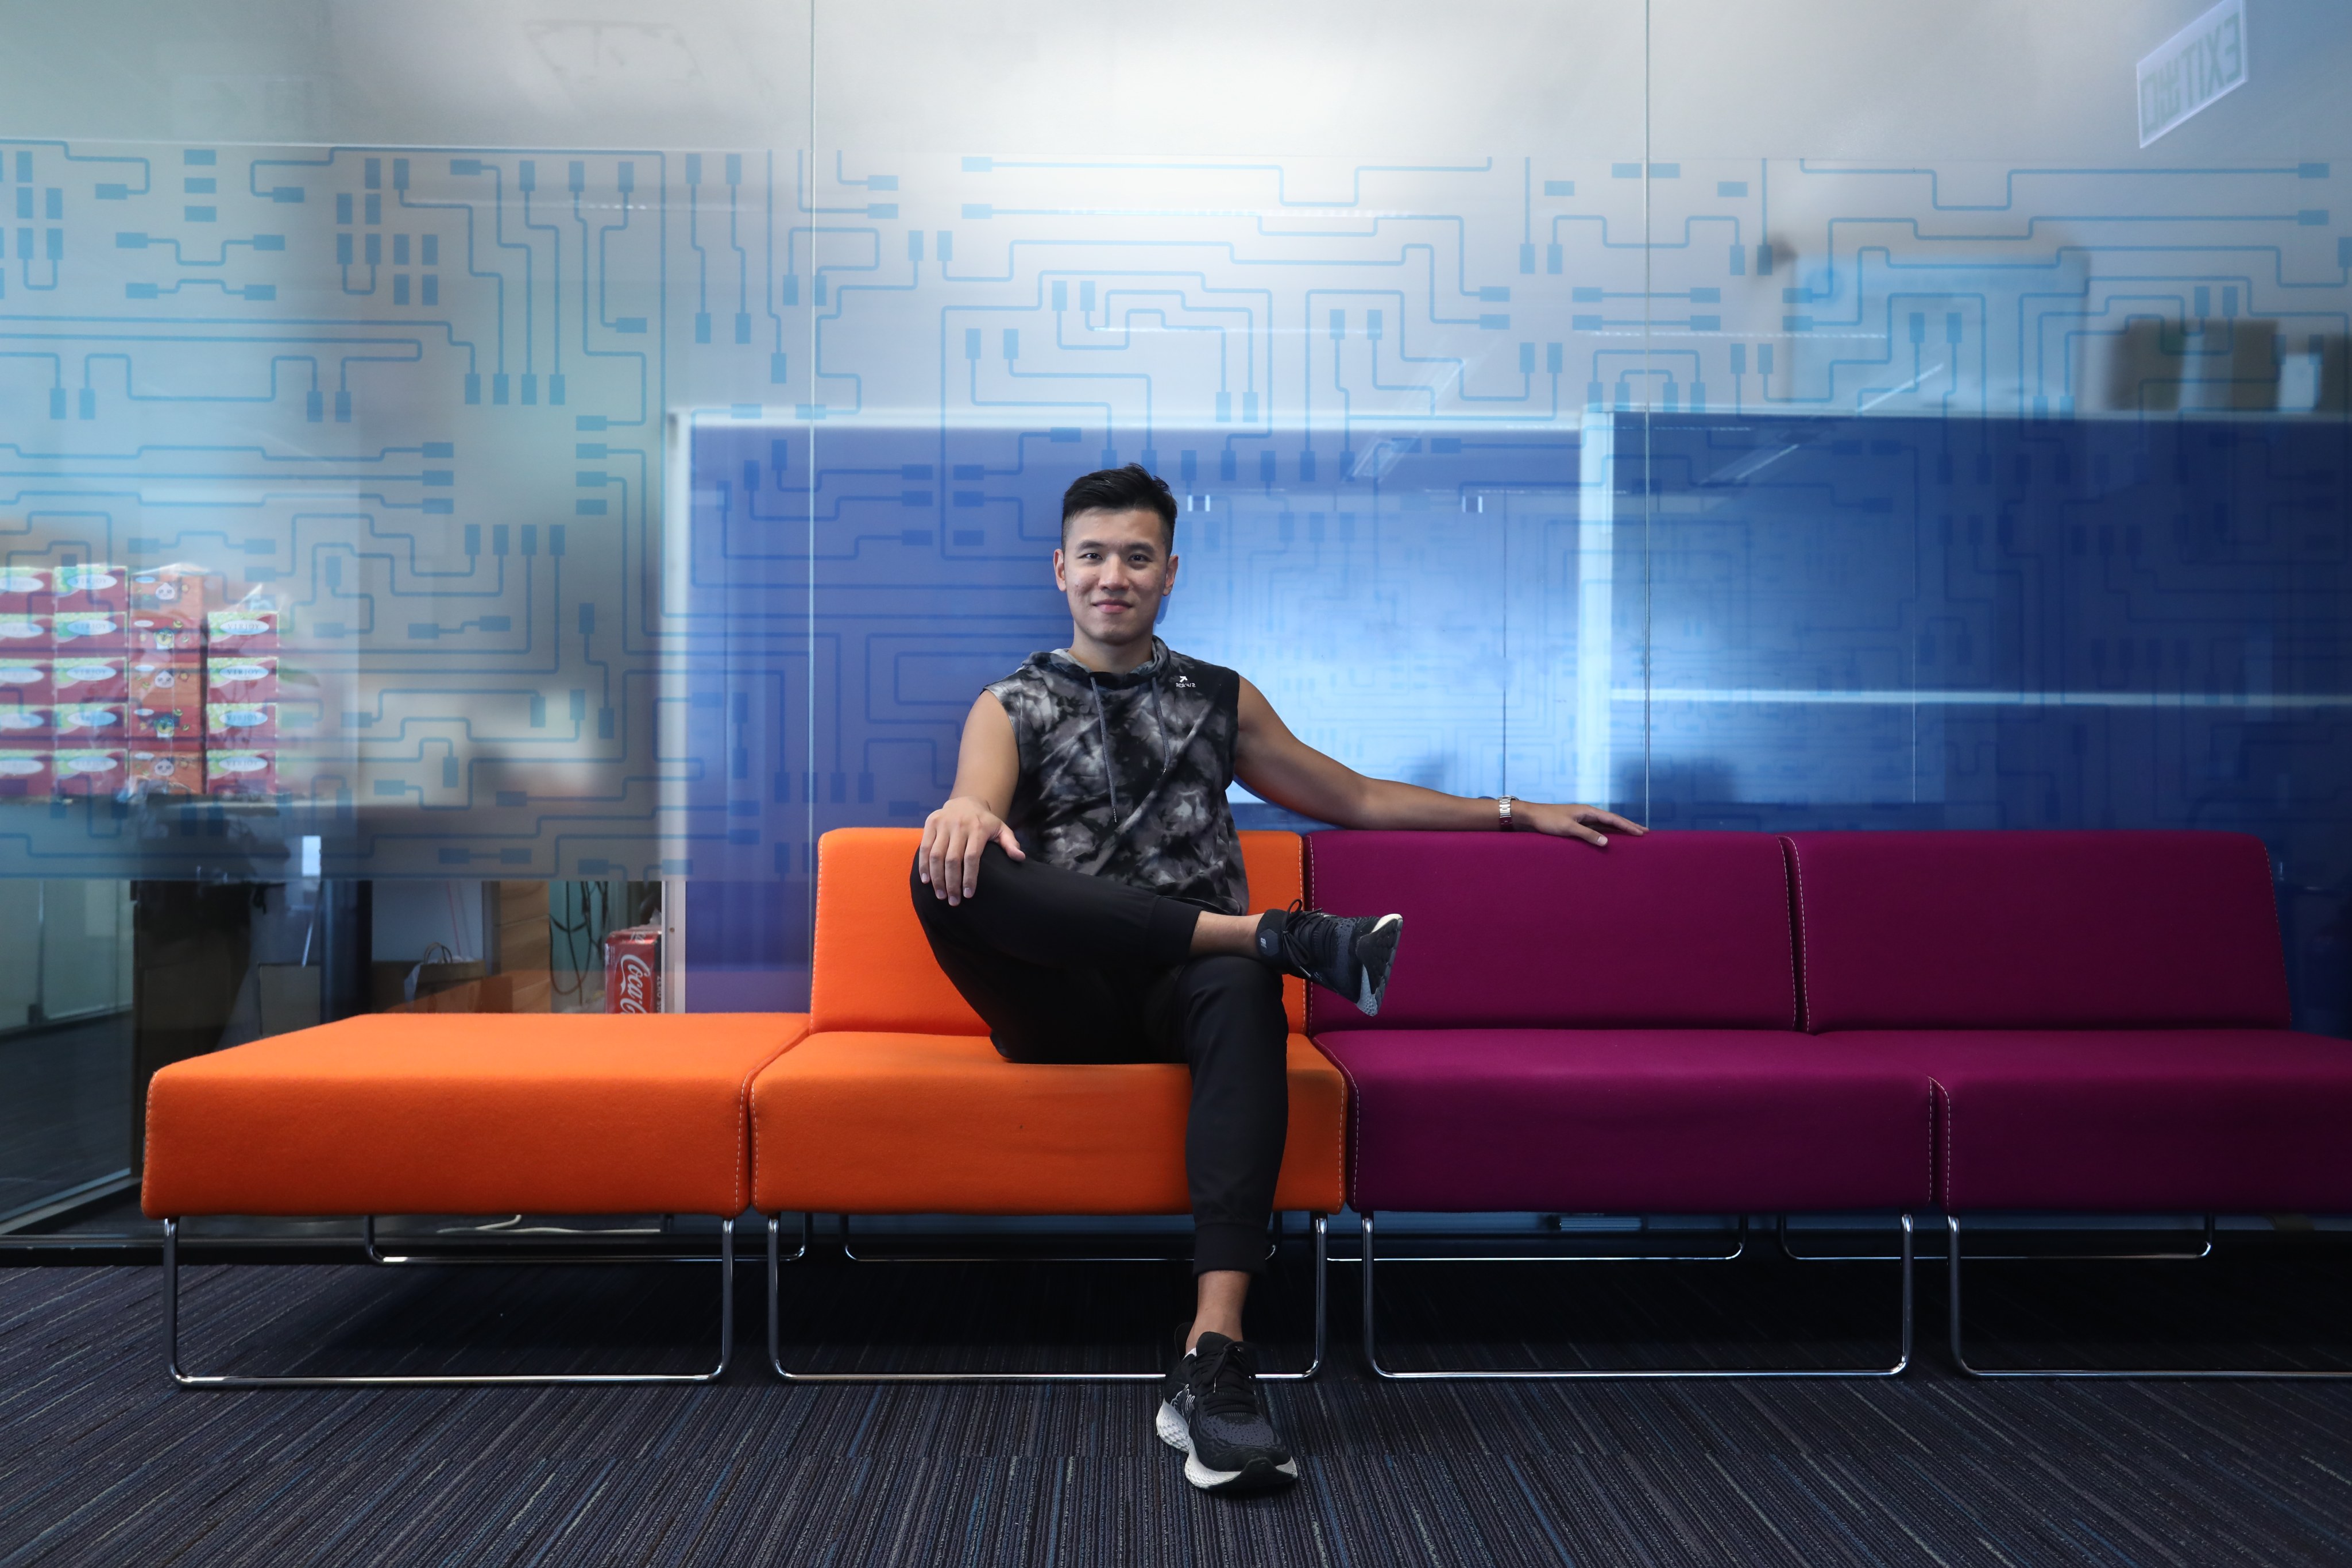 Keith Rumjahn, CEO of Kara Smart Fitness, at his offices in Cyberport. Photo: Jonathan Wong